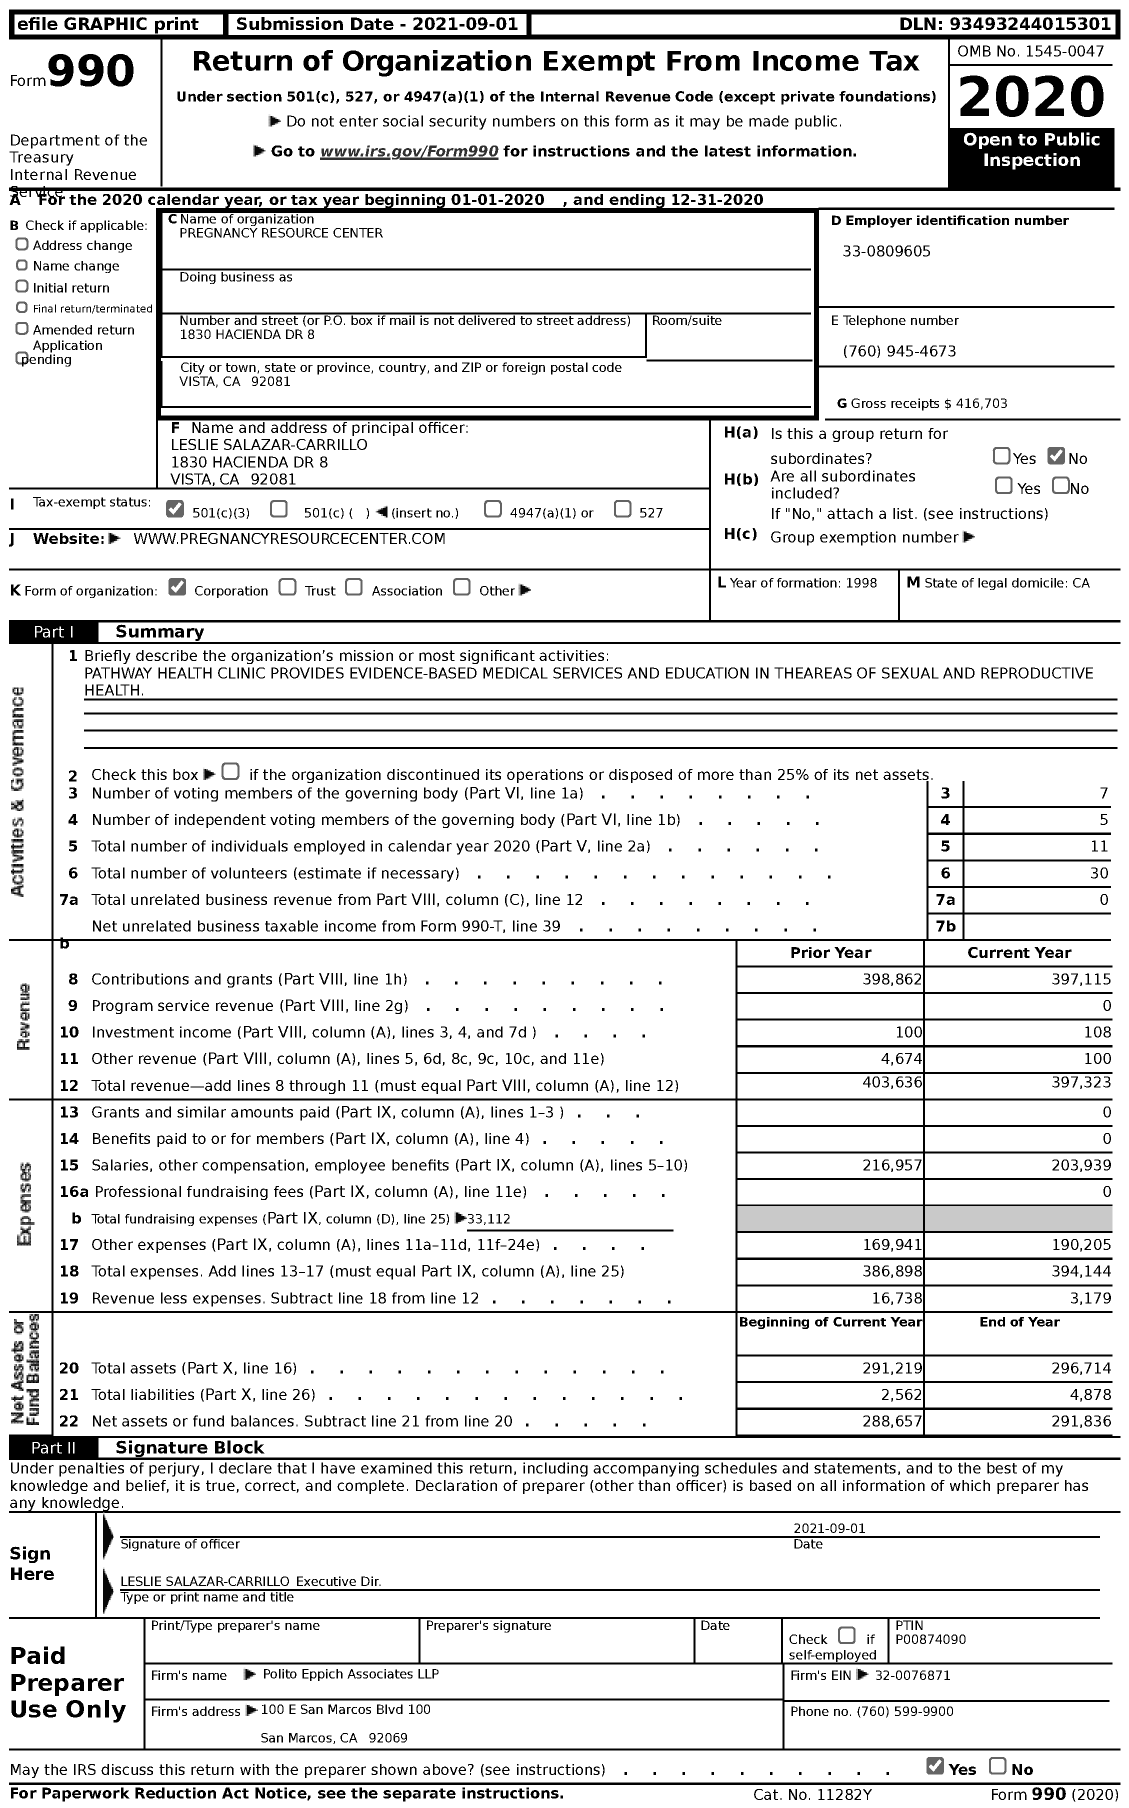 Image of first page of 2020 Form 990 for Pathway Health Clinic / Pregnancy Resource Center